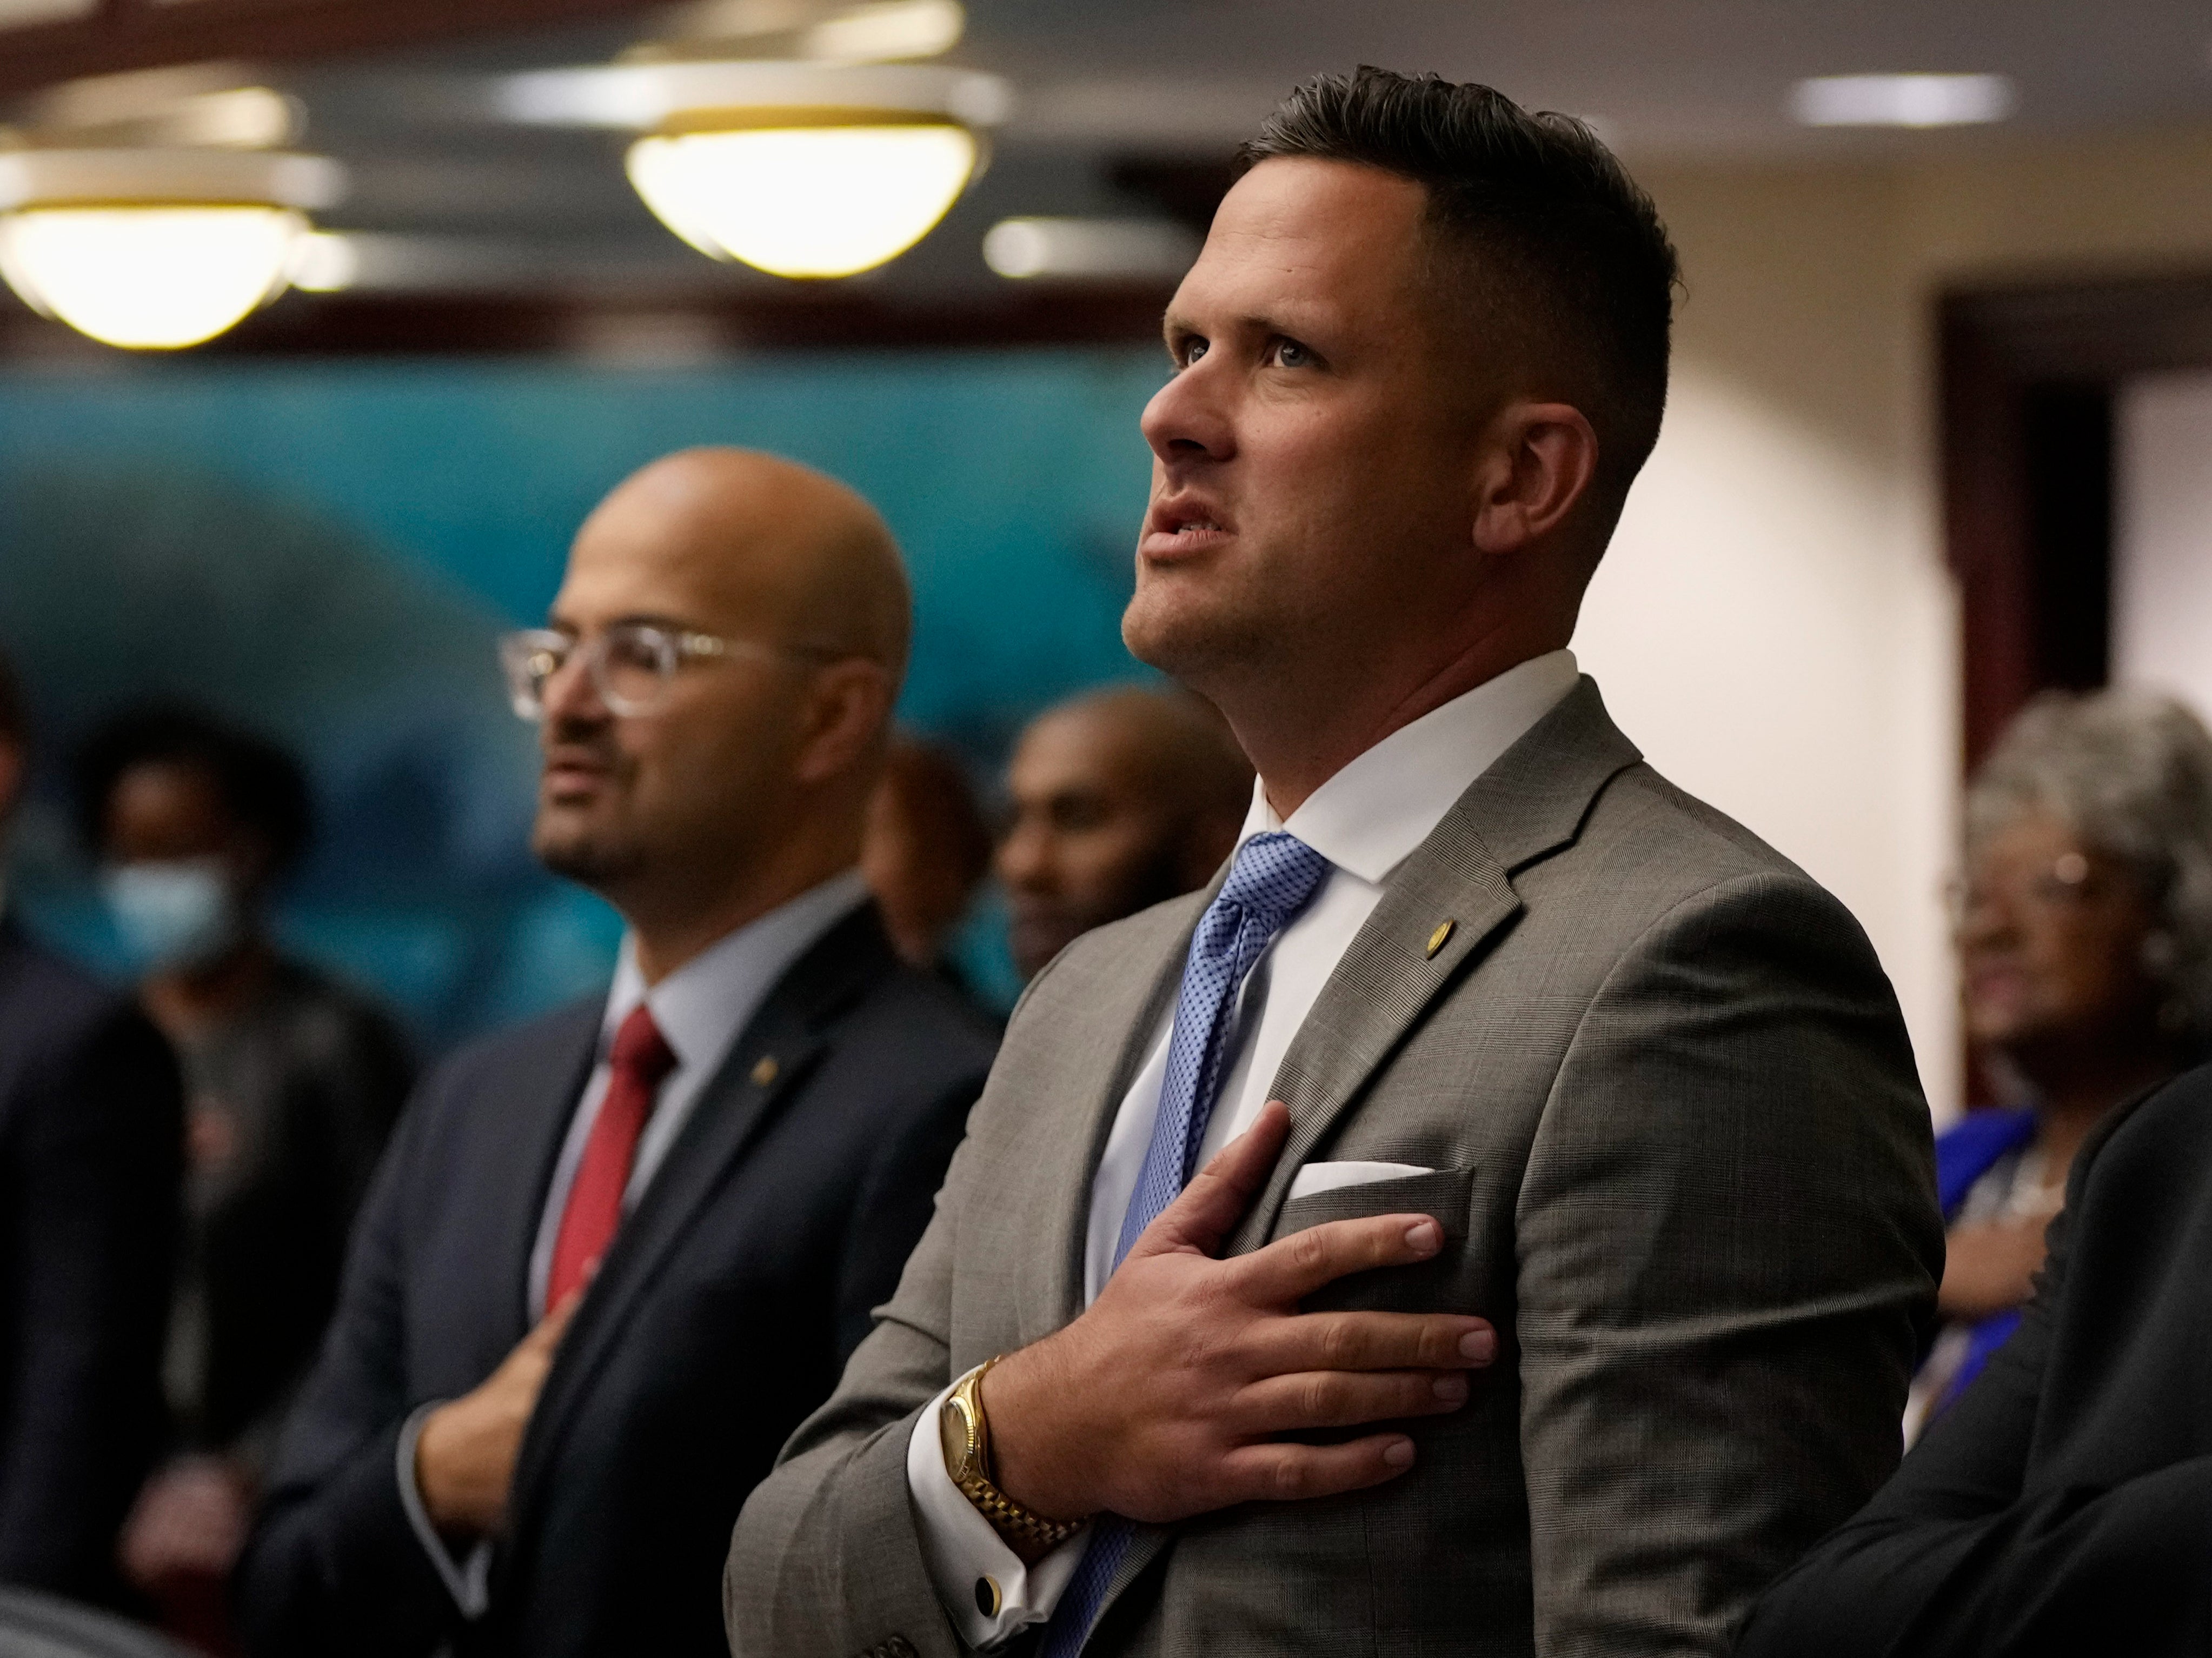 Florida Republican state Rep Joe Harding, right, is a chief sponsor of what opponents call ‘Don’t Say Gay’ legislation in the state legislature.